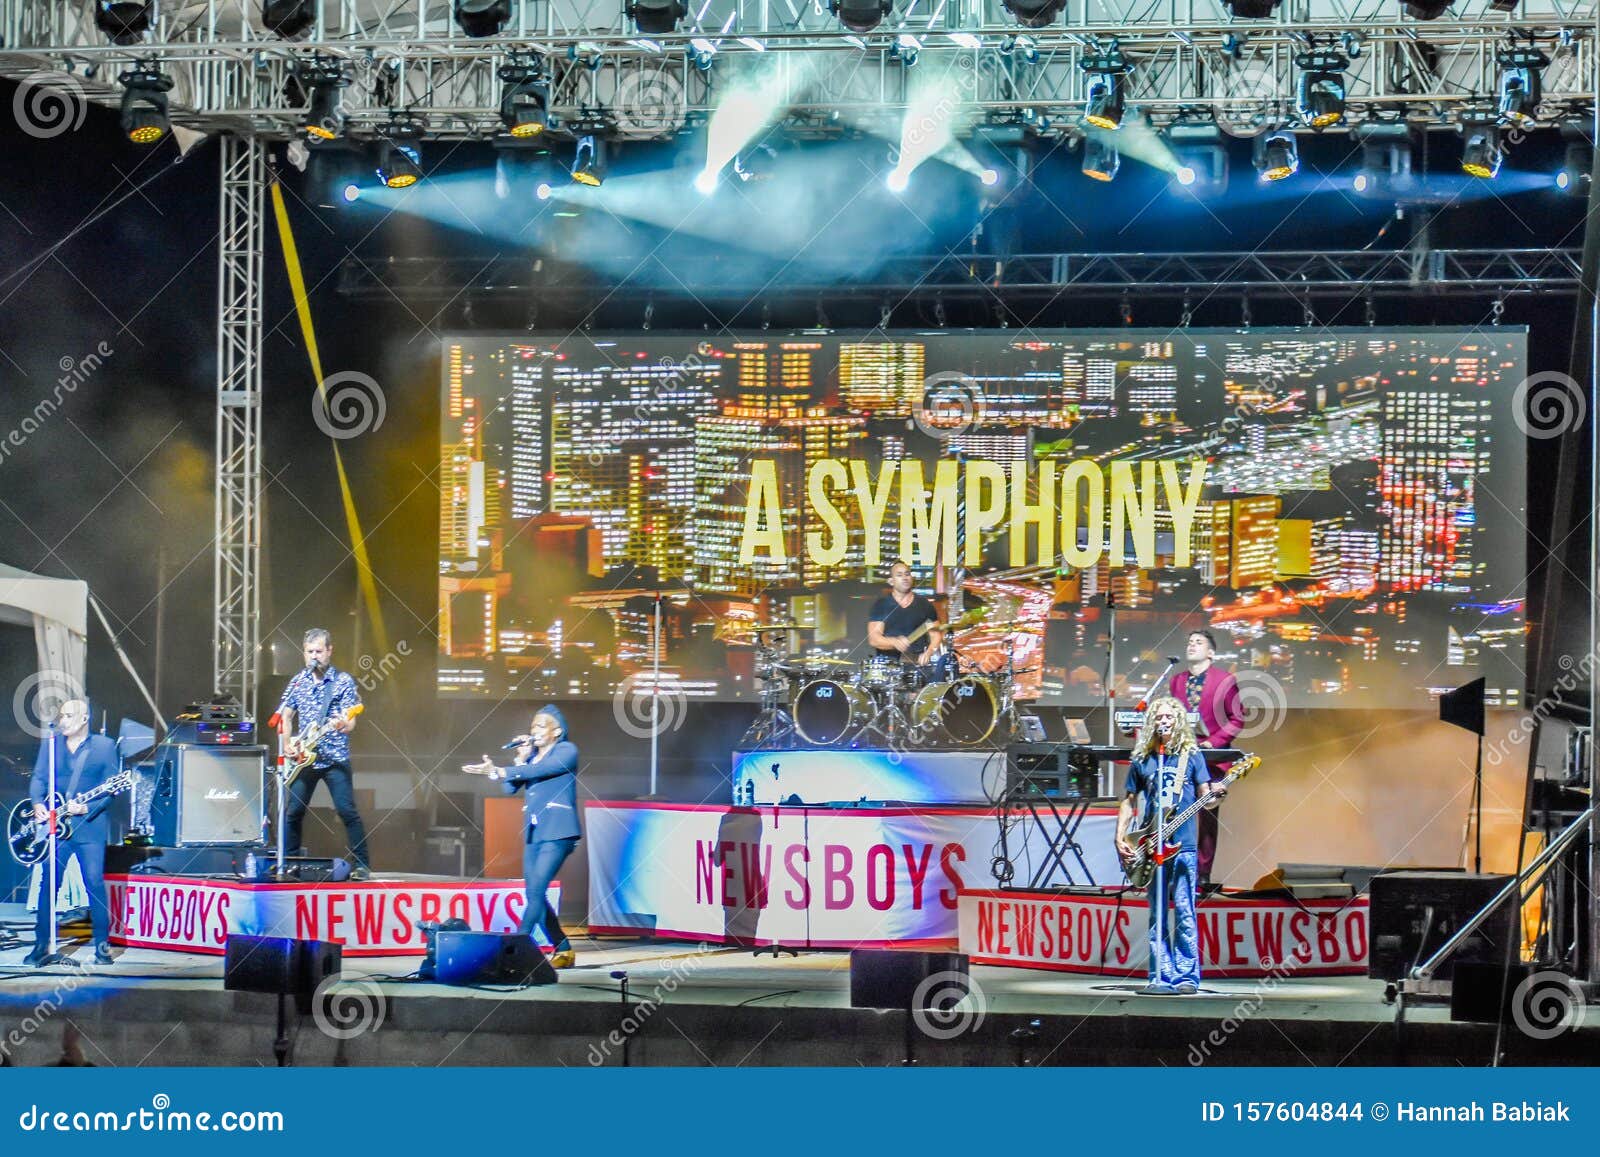 Newsboys United Concert, A Symphony Editorial Stock Image - Image of